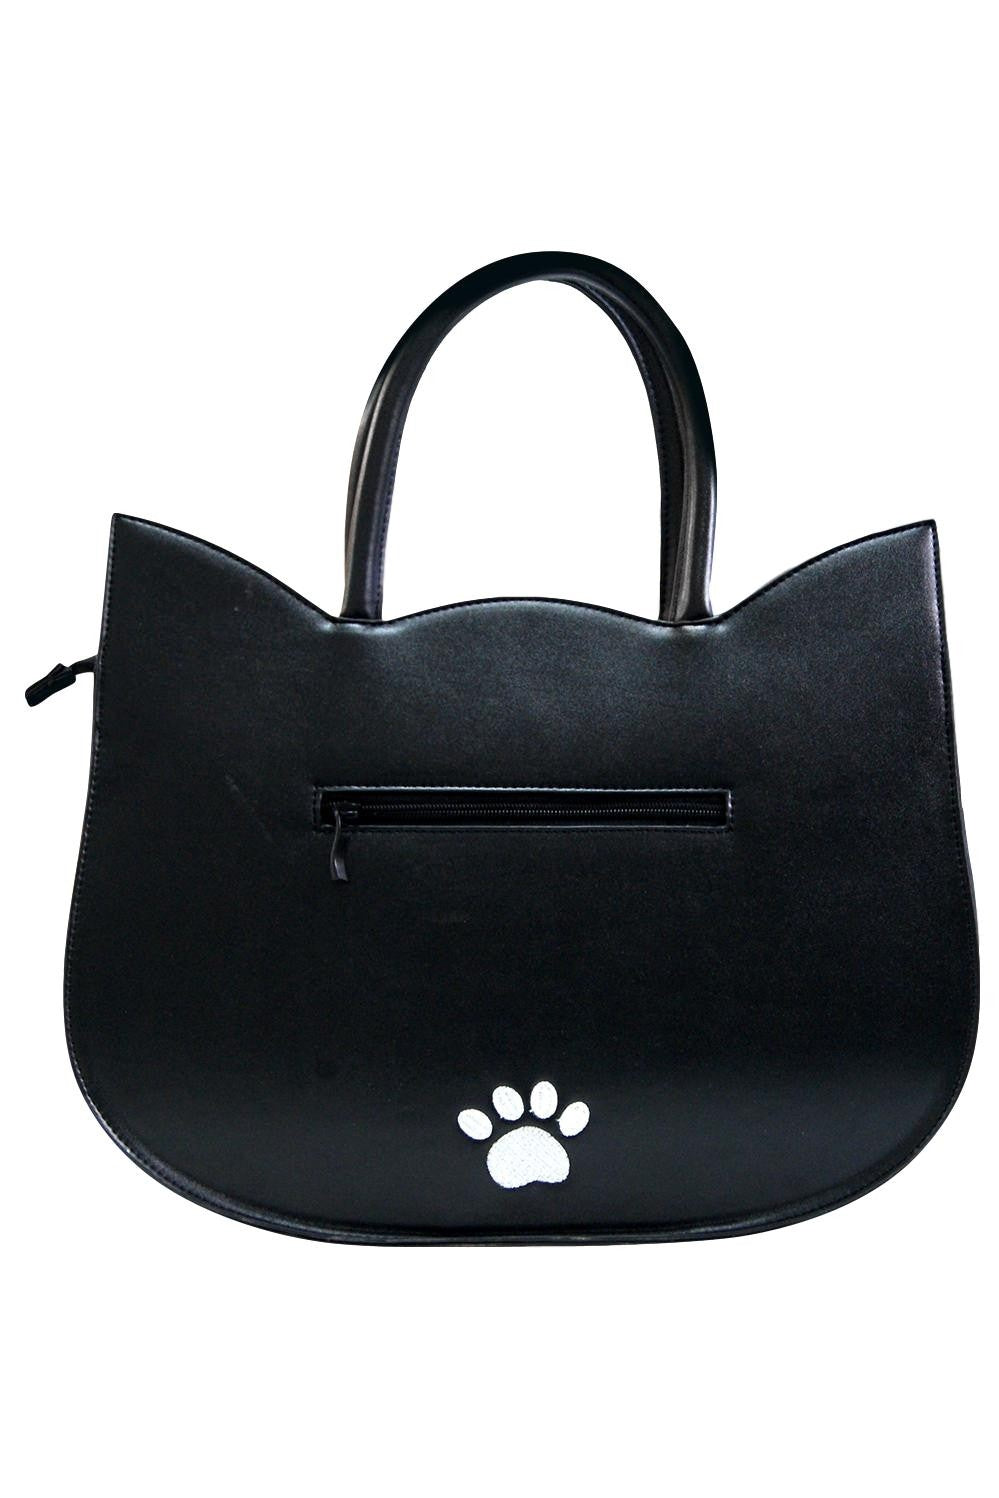 Banned Heart of Gold Very Large Cat Bag